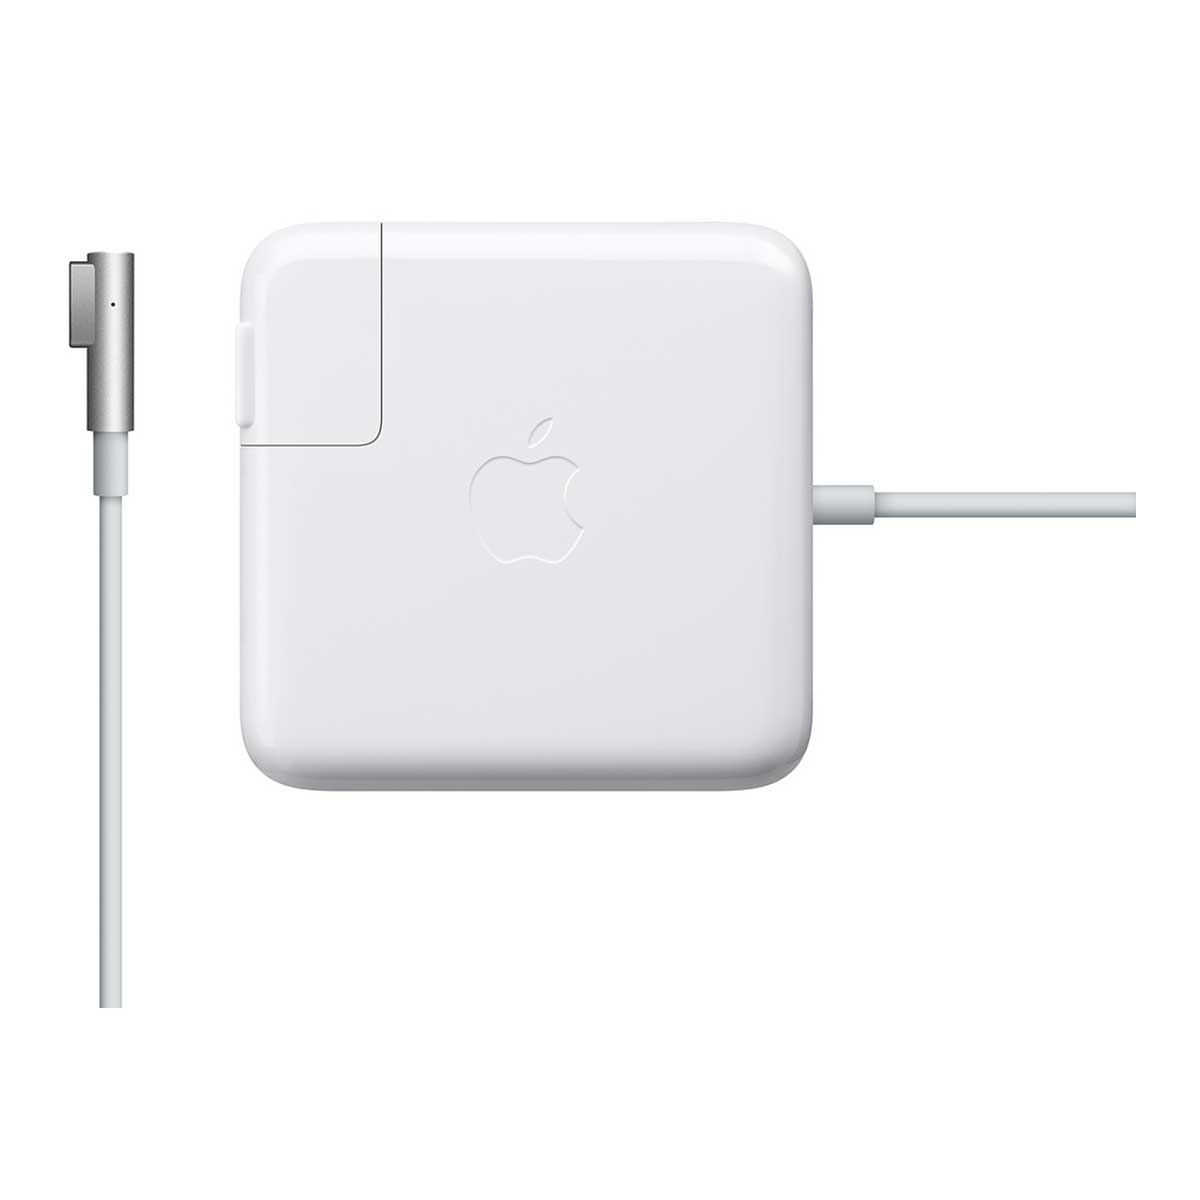 85W MagSafe Power Adapter